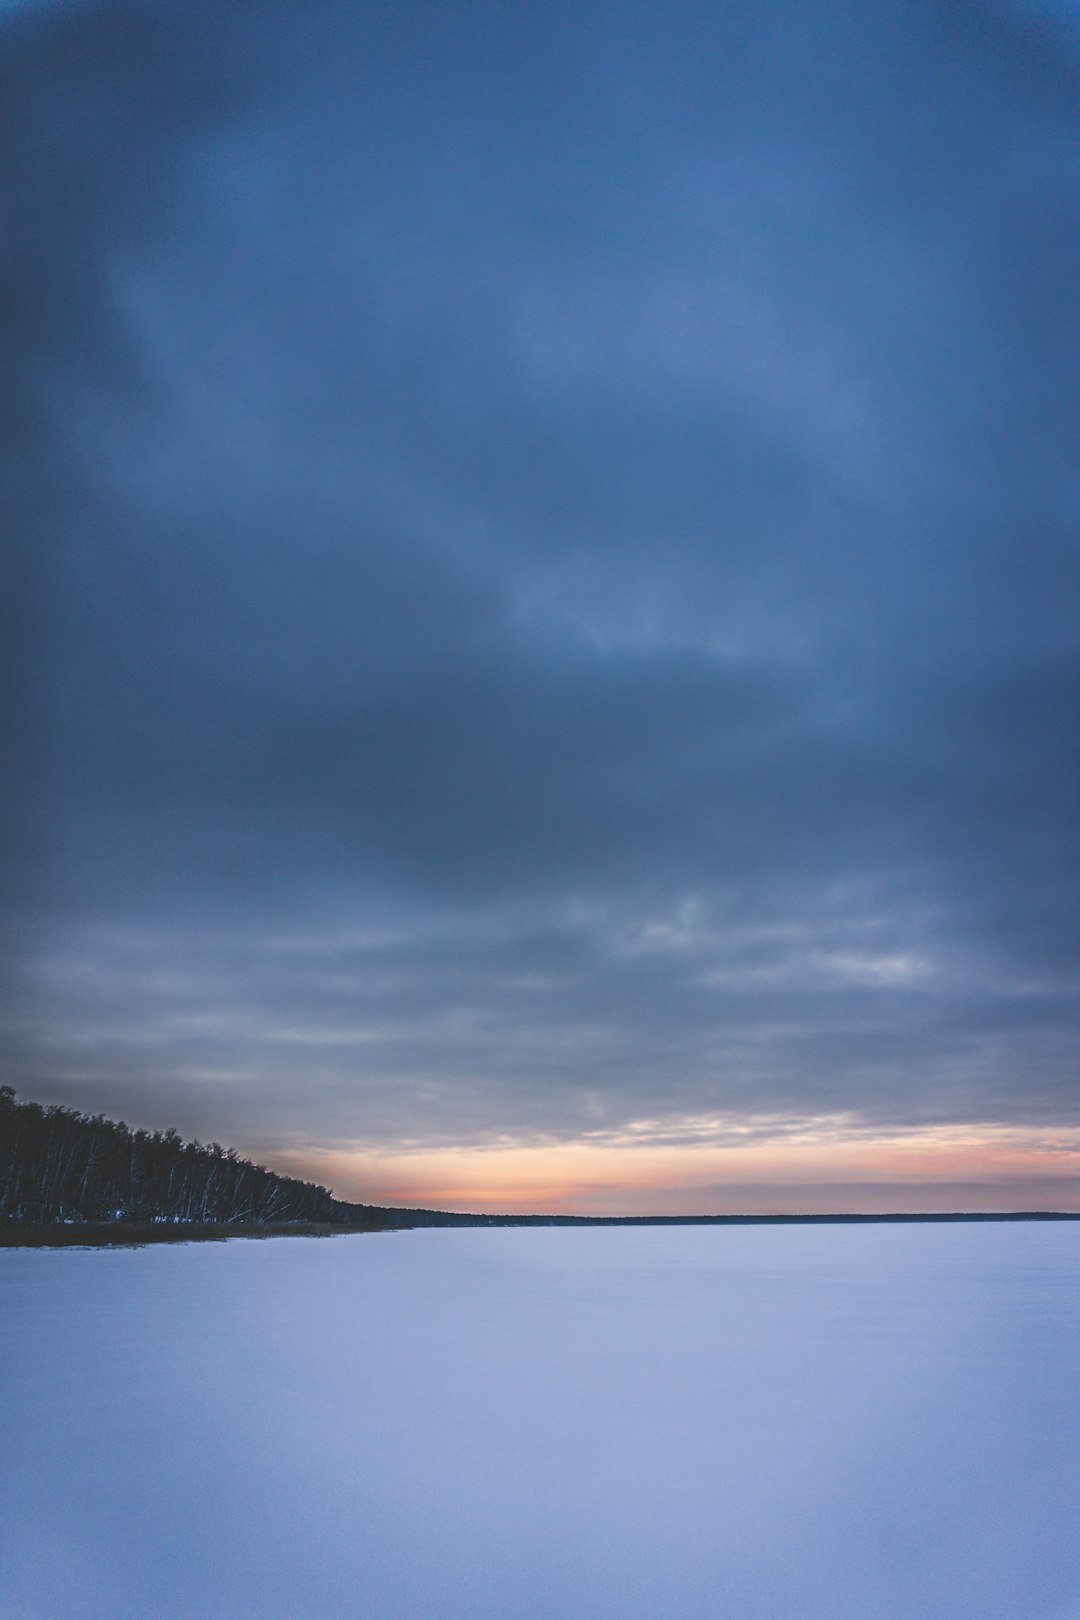 Frozen lake with gray skies